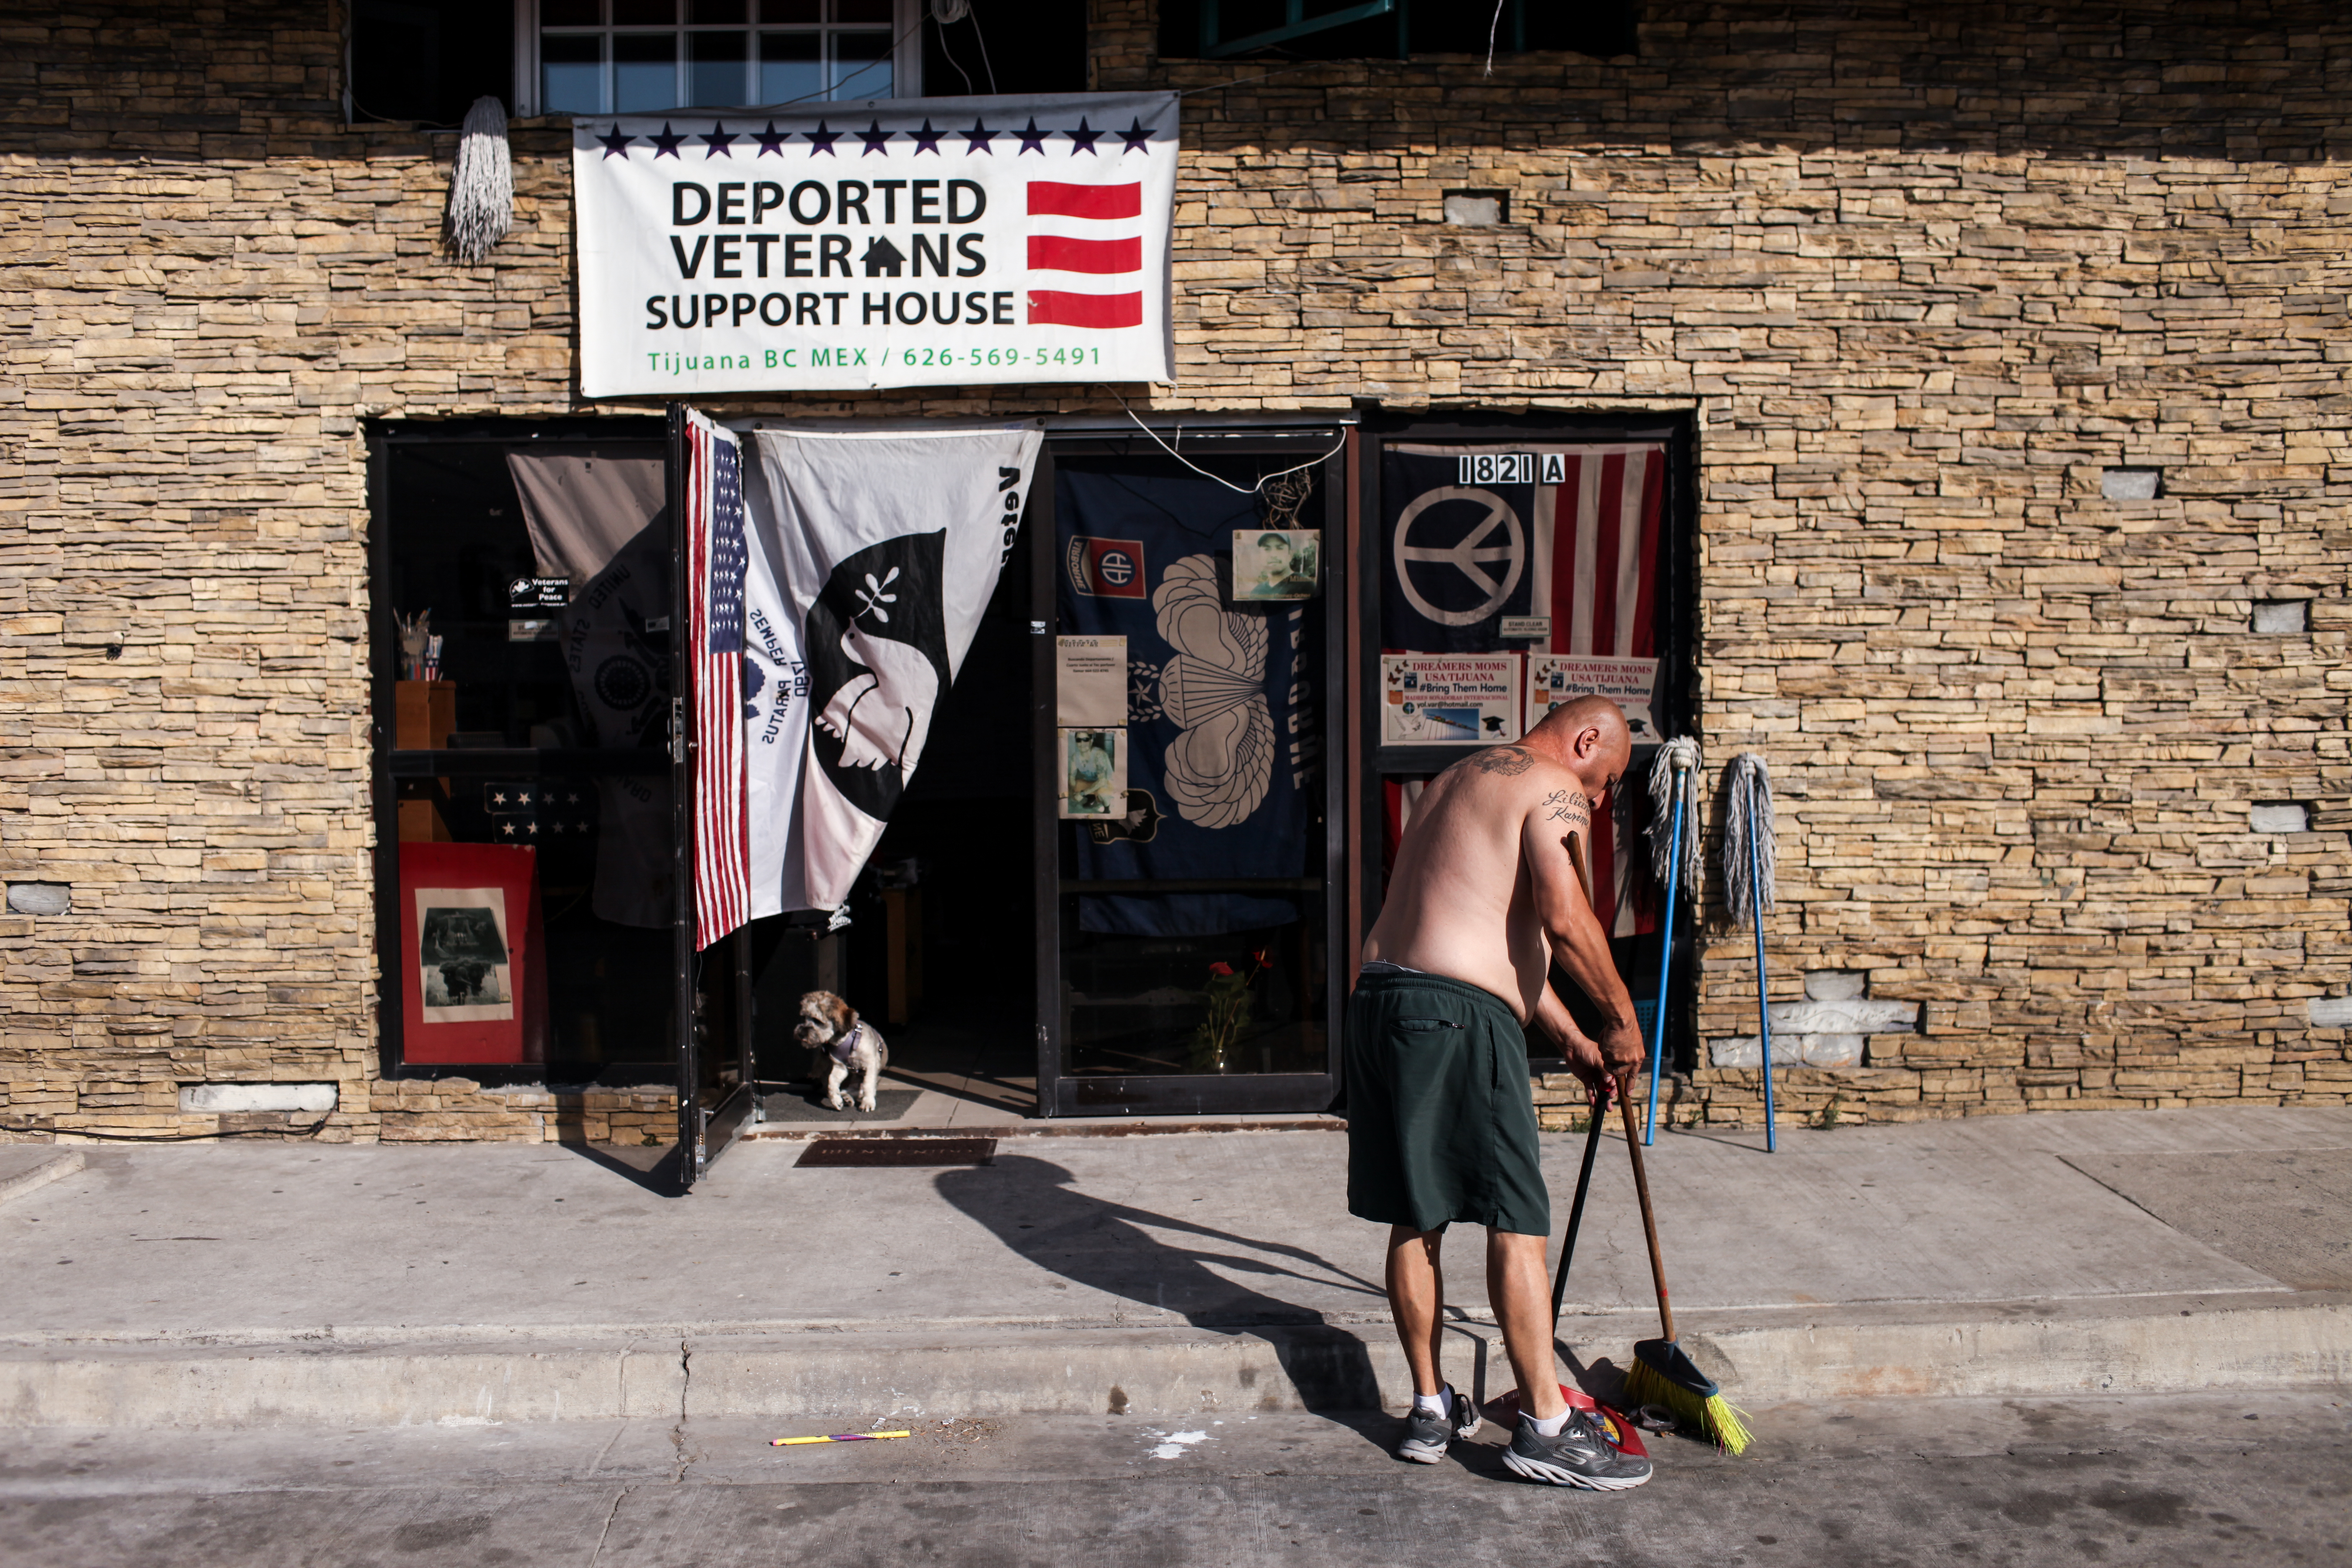 Deported U.S. Military Veterans in Mexico